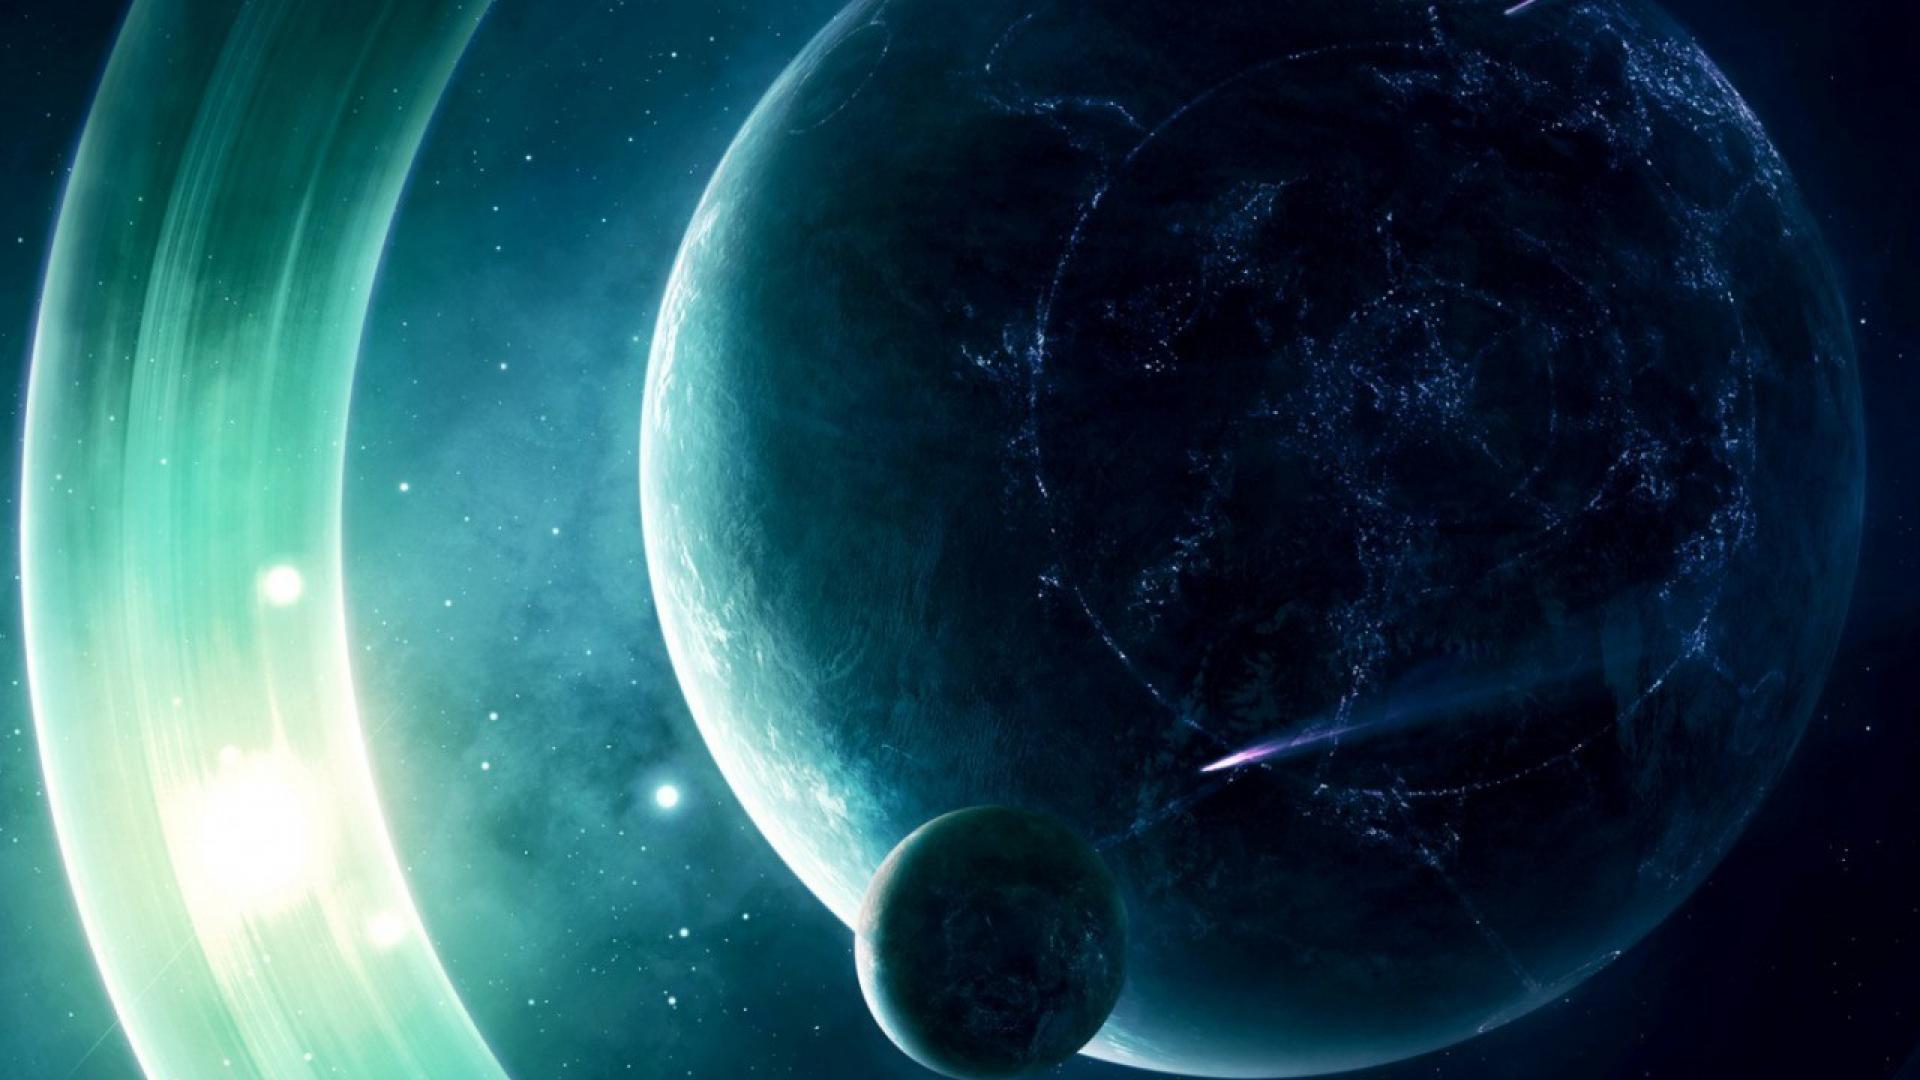 Moon outer space planets rings science fiction wallpaper | (88960)